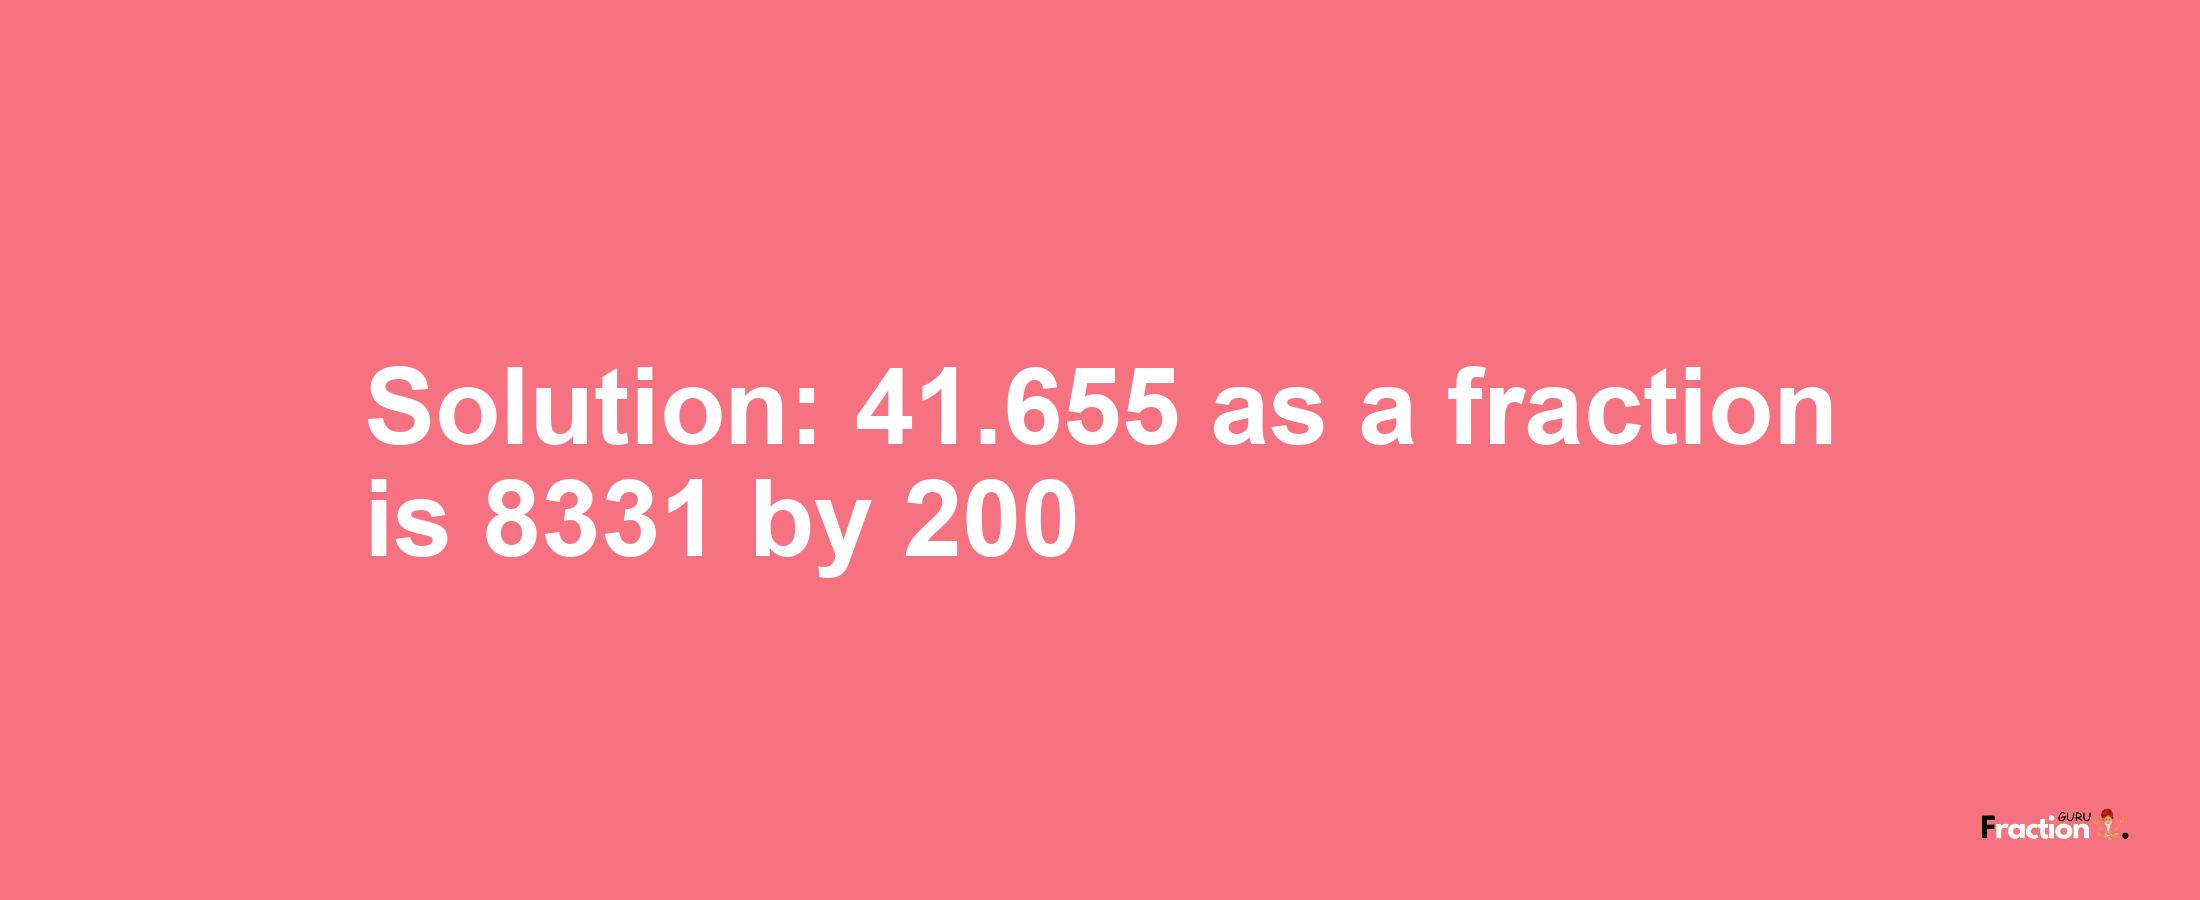 Solution:41.655 as a fraction is 8331/200